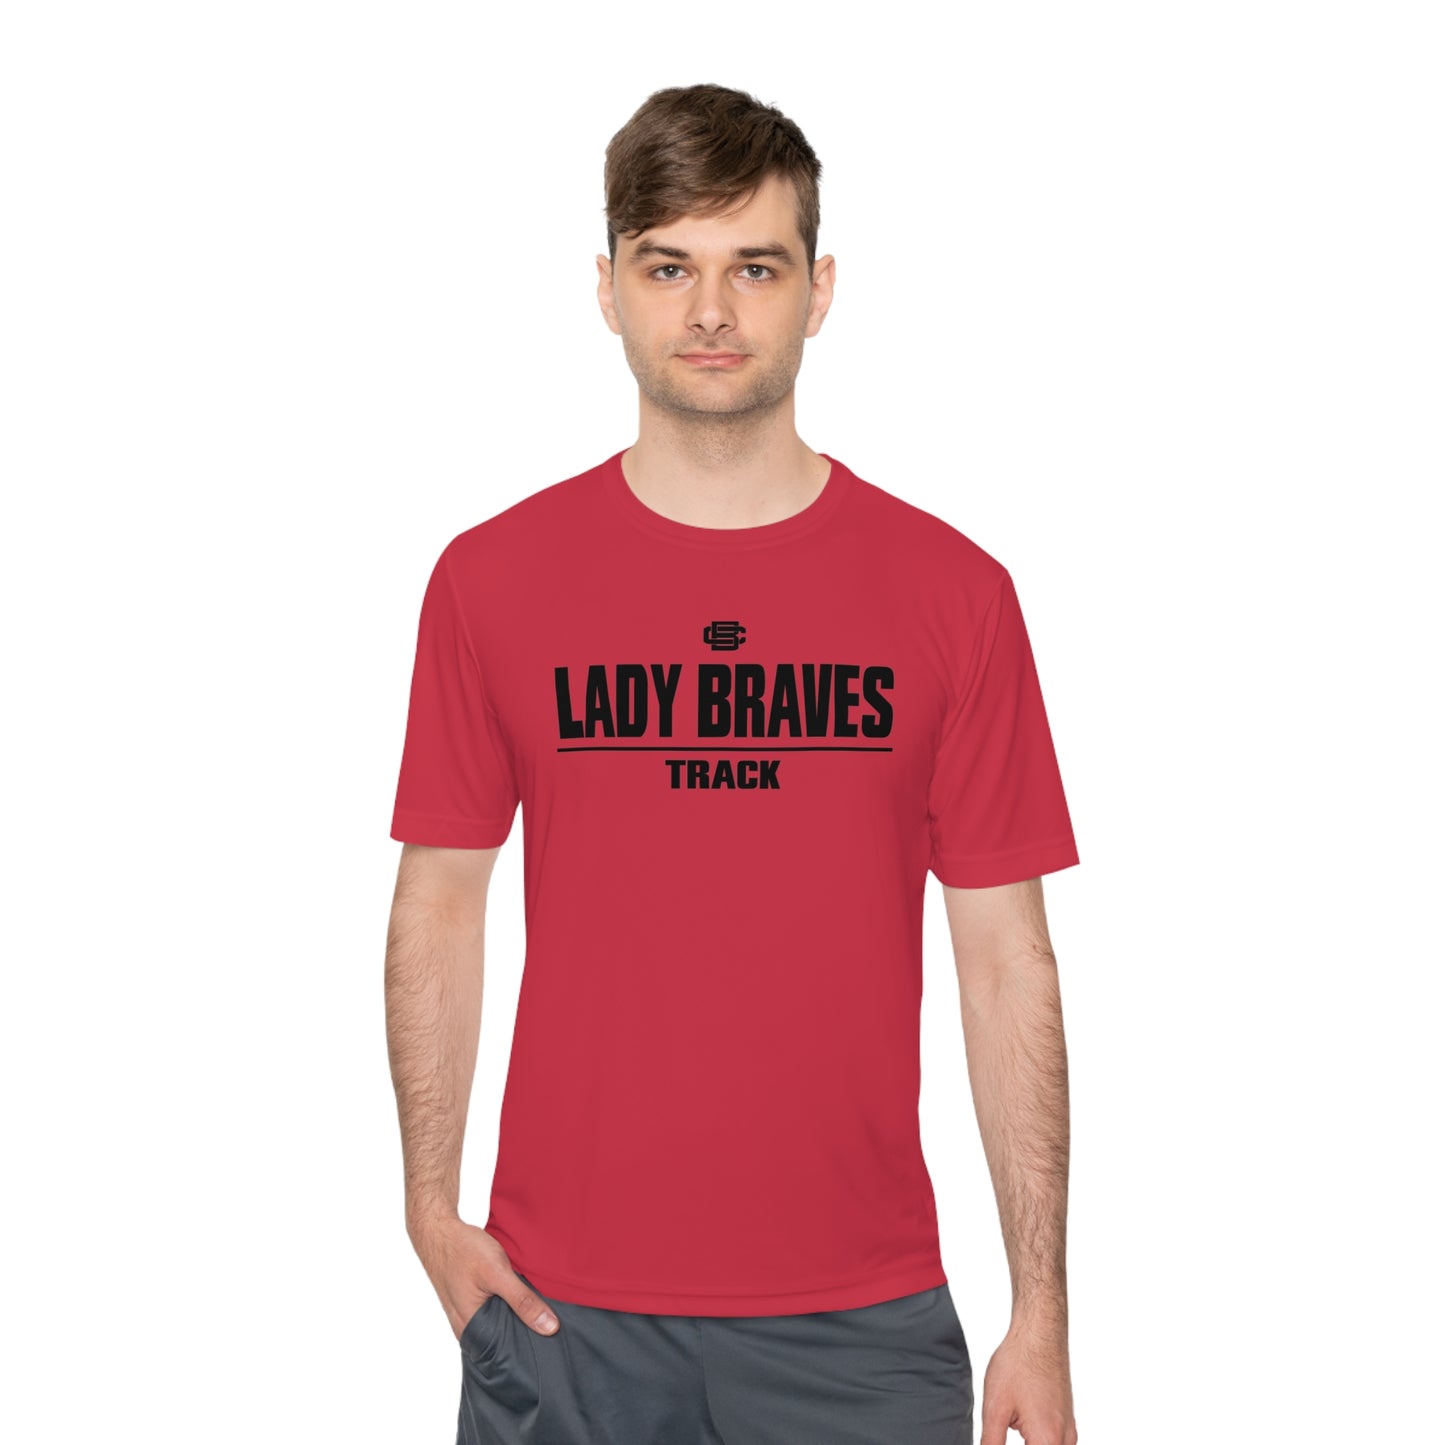 Lady Braves Track Moisture Wicking Tee